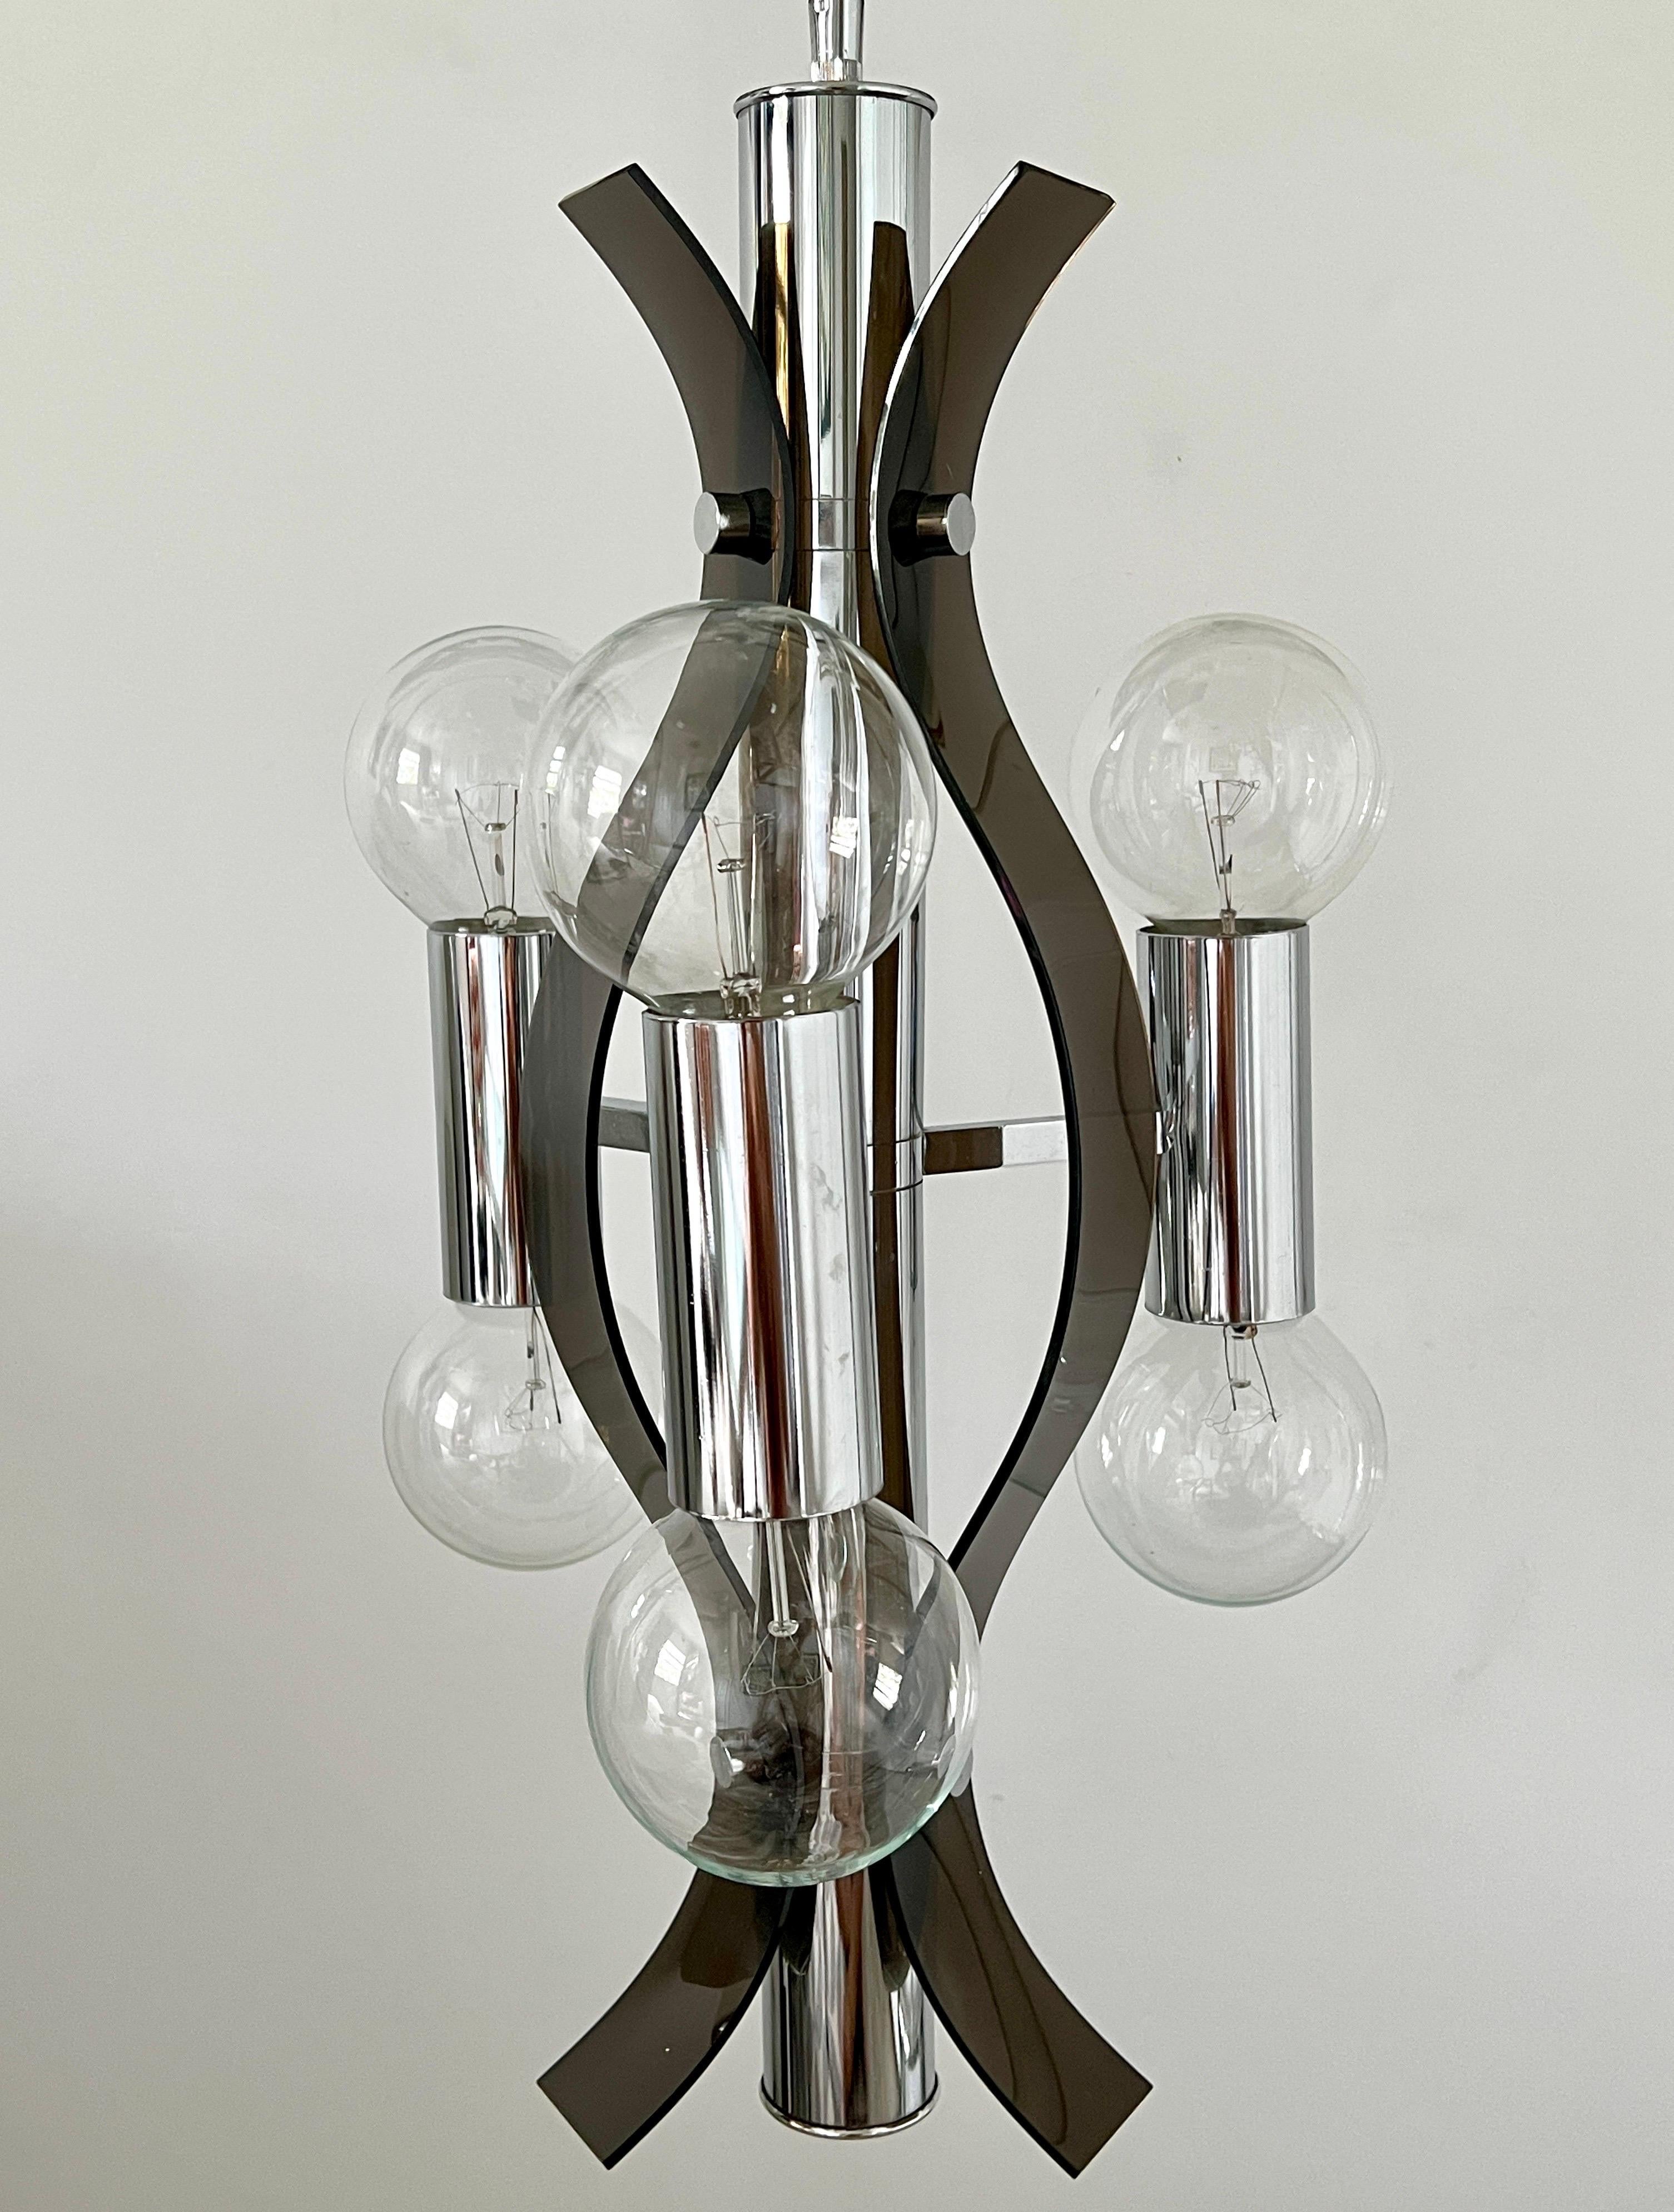 Mid-Century Modern Sculptural Chandelier in Chrome and Smoked Lucite, Robert Sonneman, c. 1970's For Sale